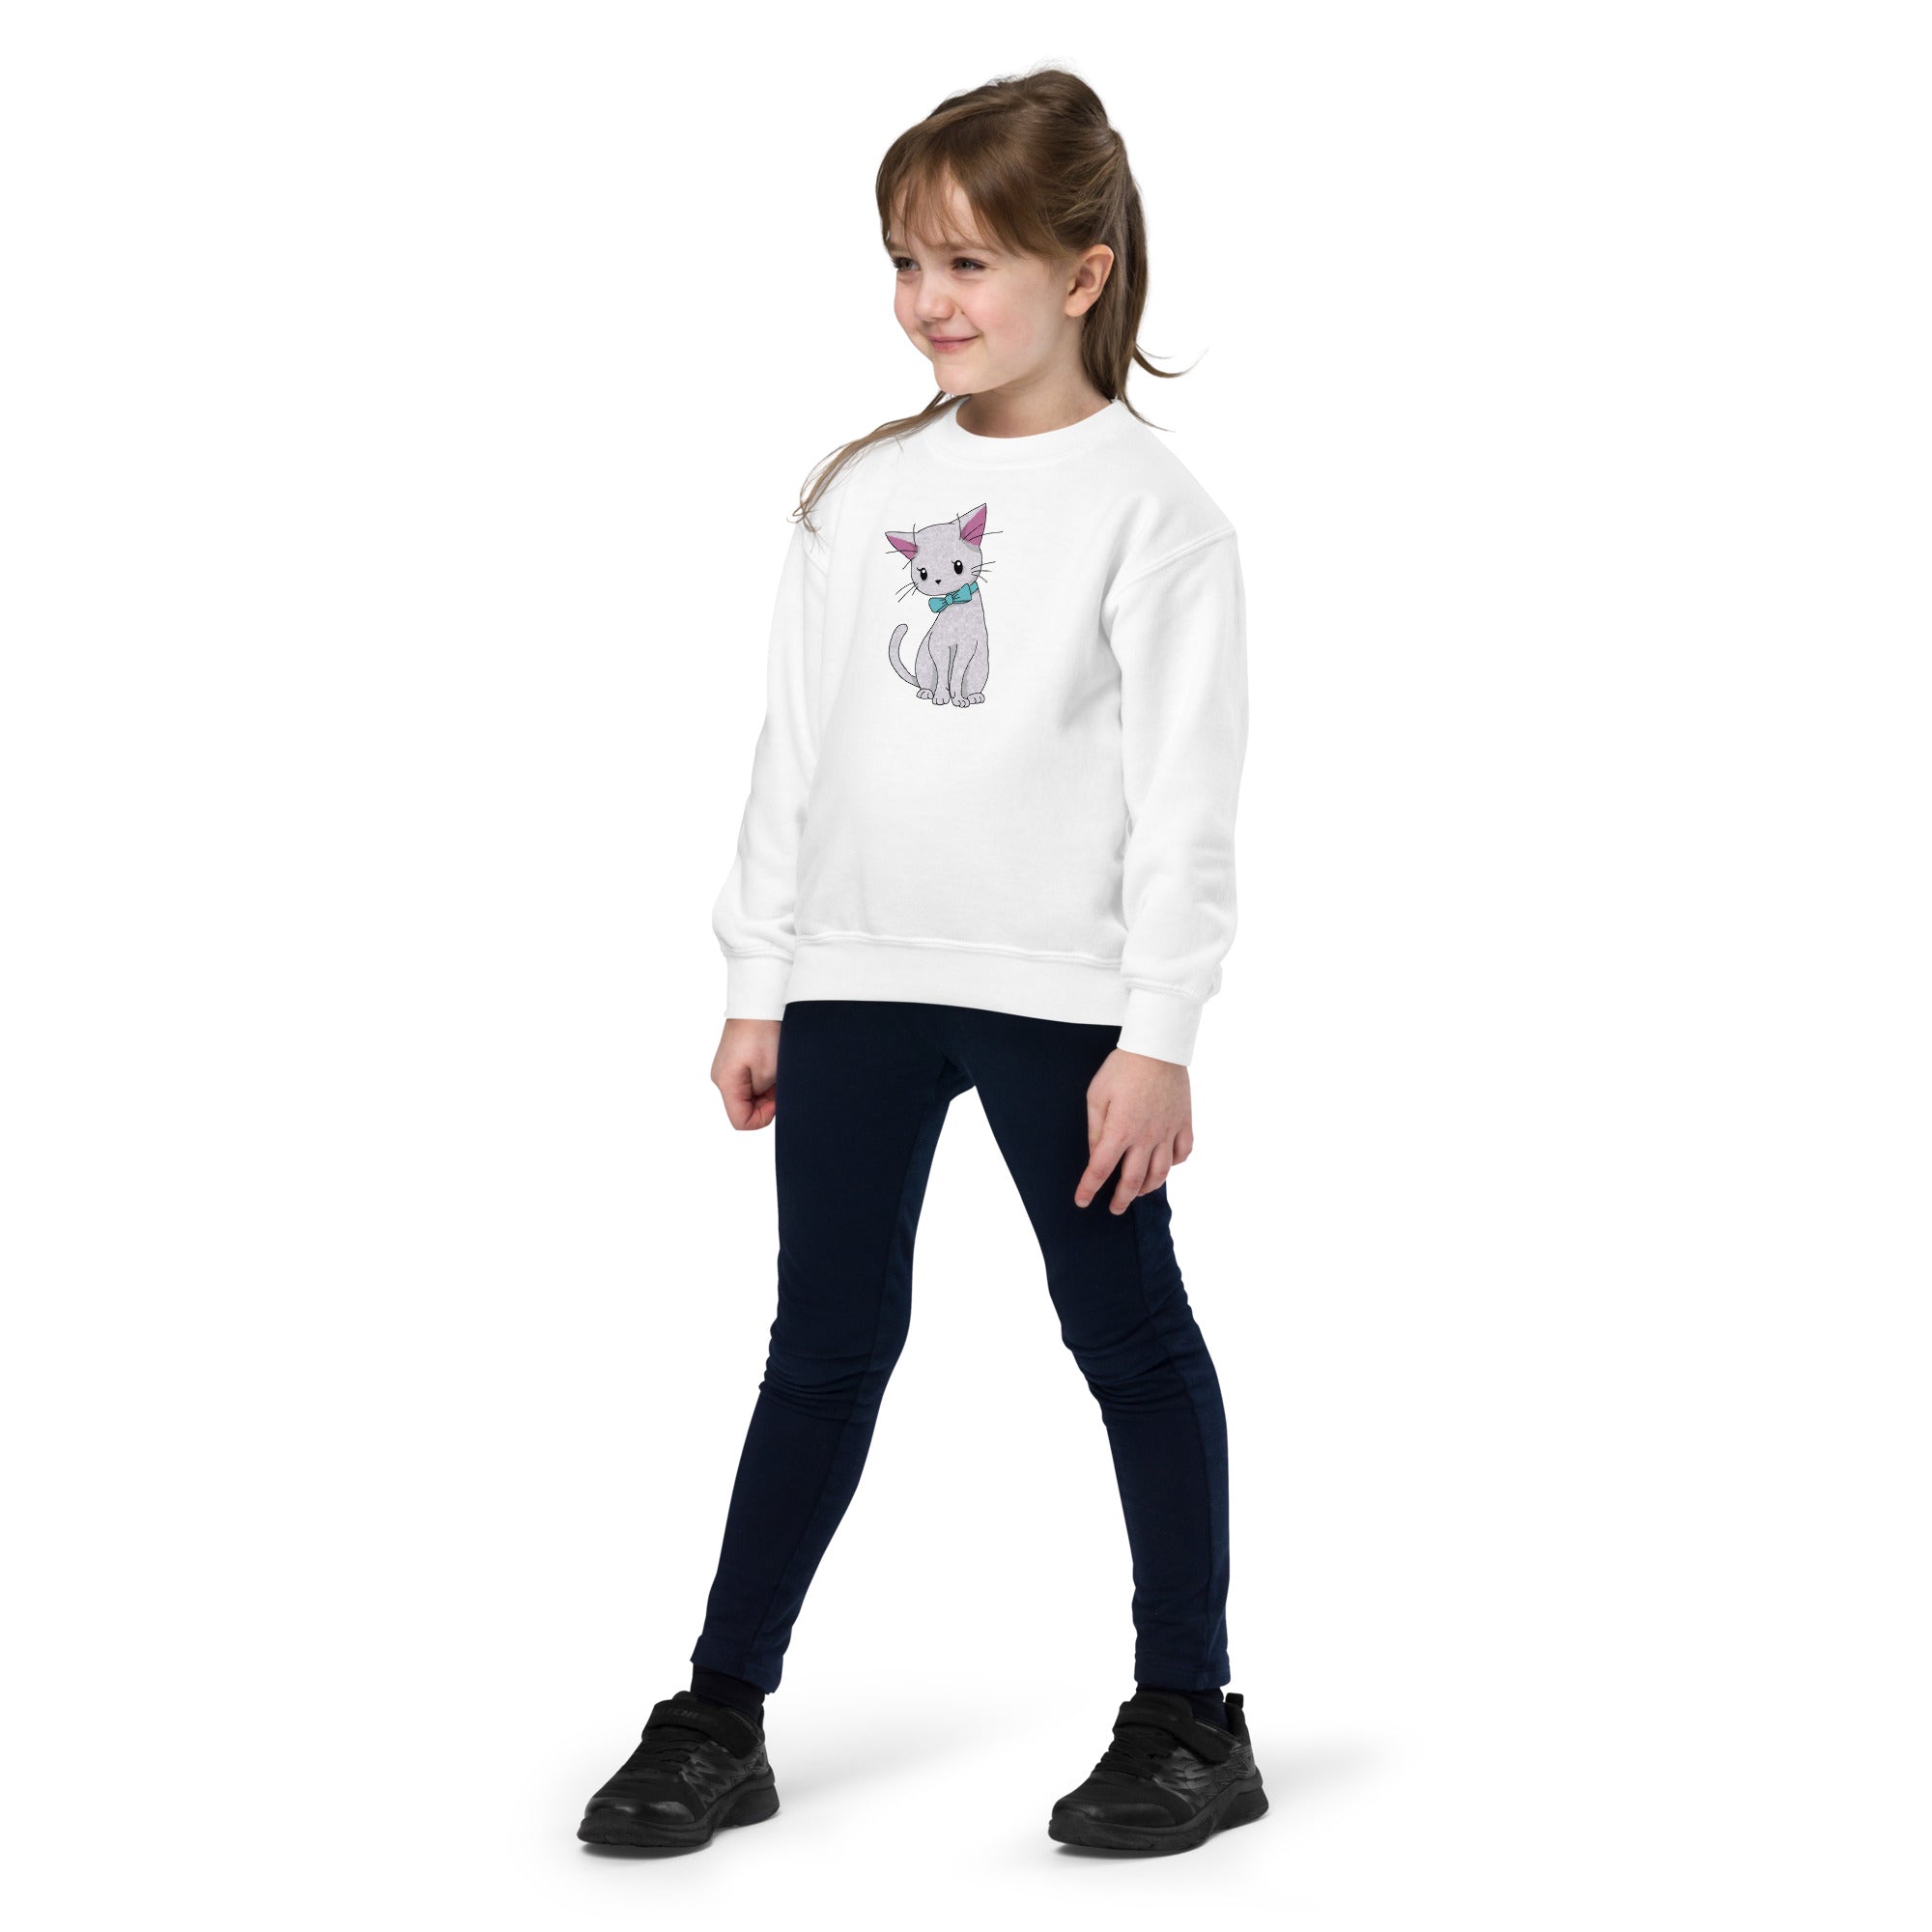 Cat with a Bow Tie Youth Sweatshirt